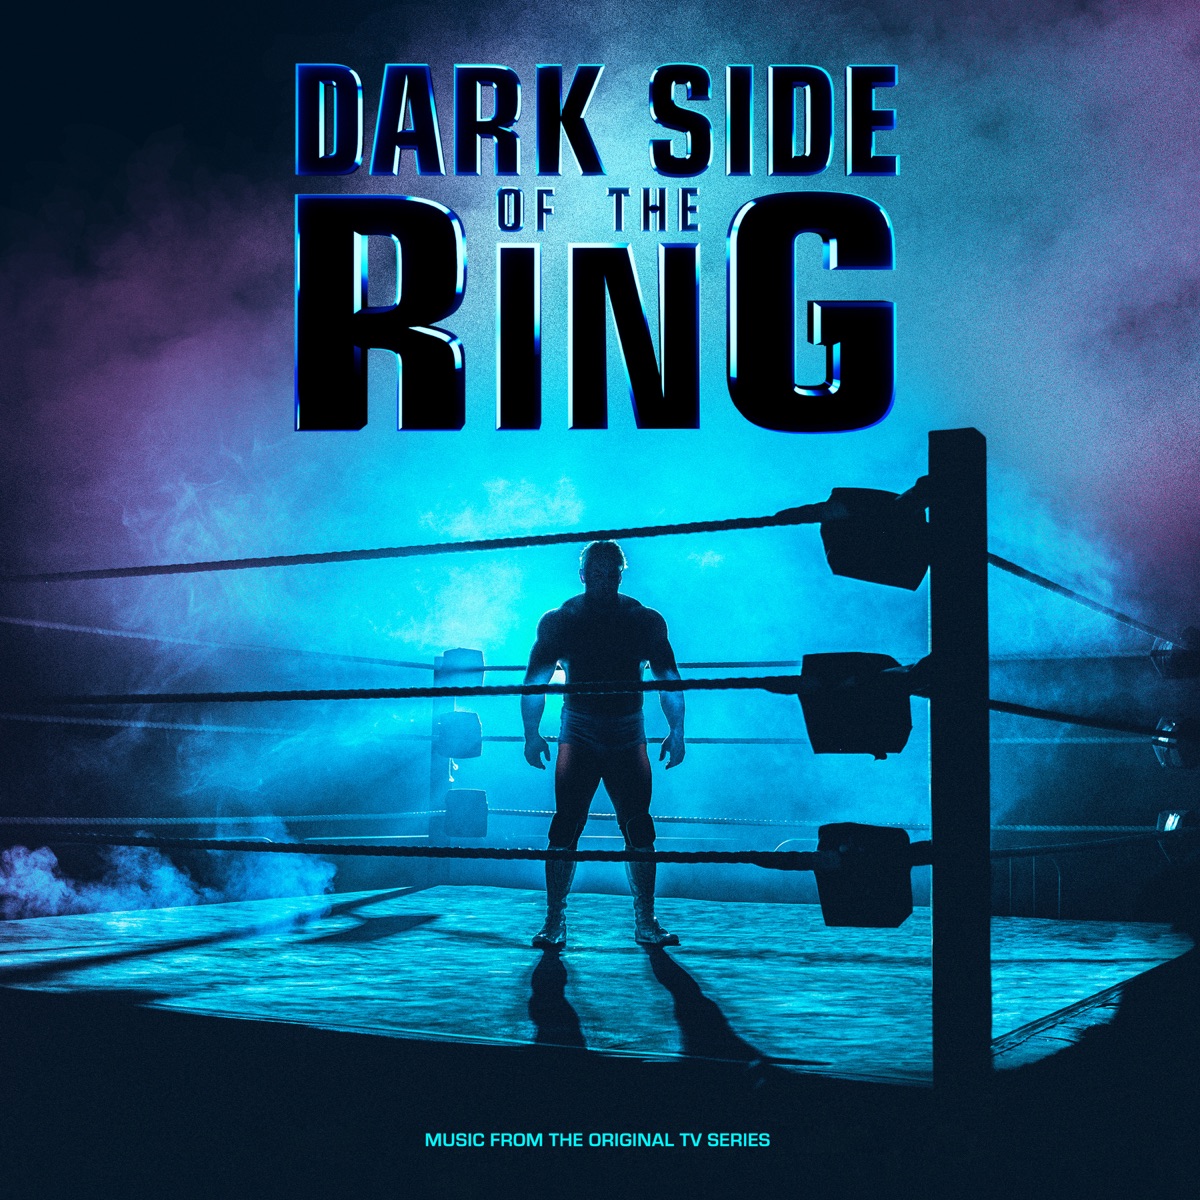 Dark Side of the Ring (Music from the Original TV Series) - Album by Wade  Macneil & Andrew Gordon MacPherson - Apple Music